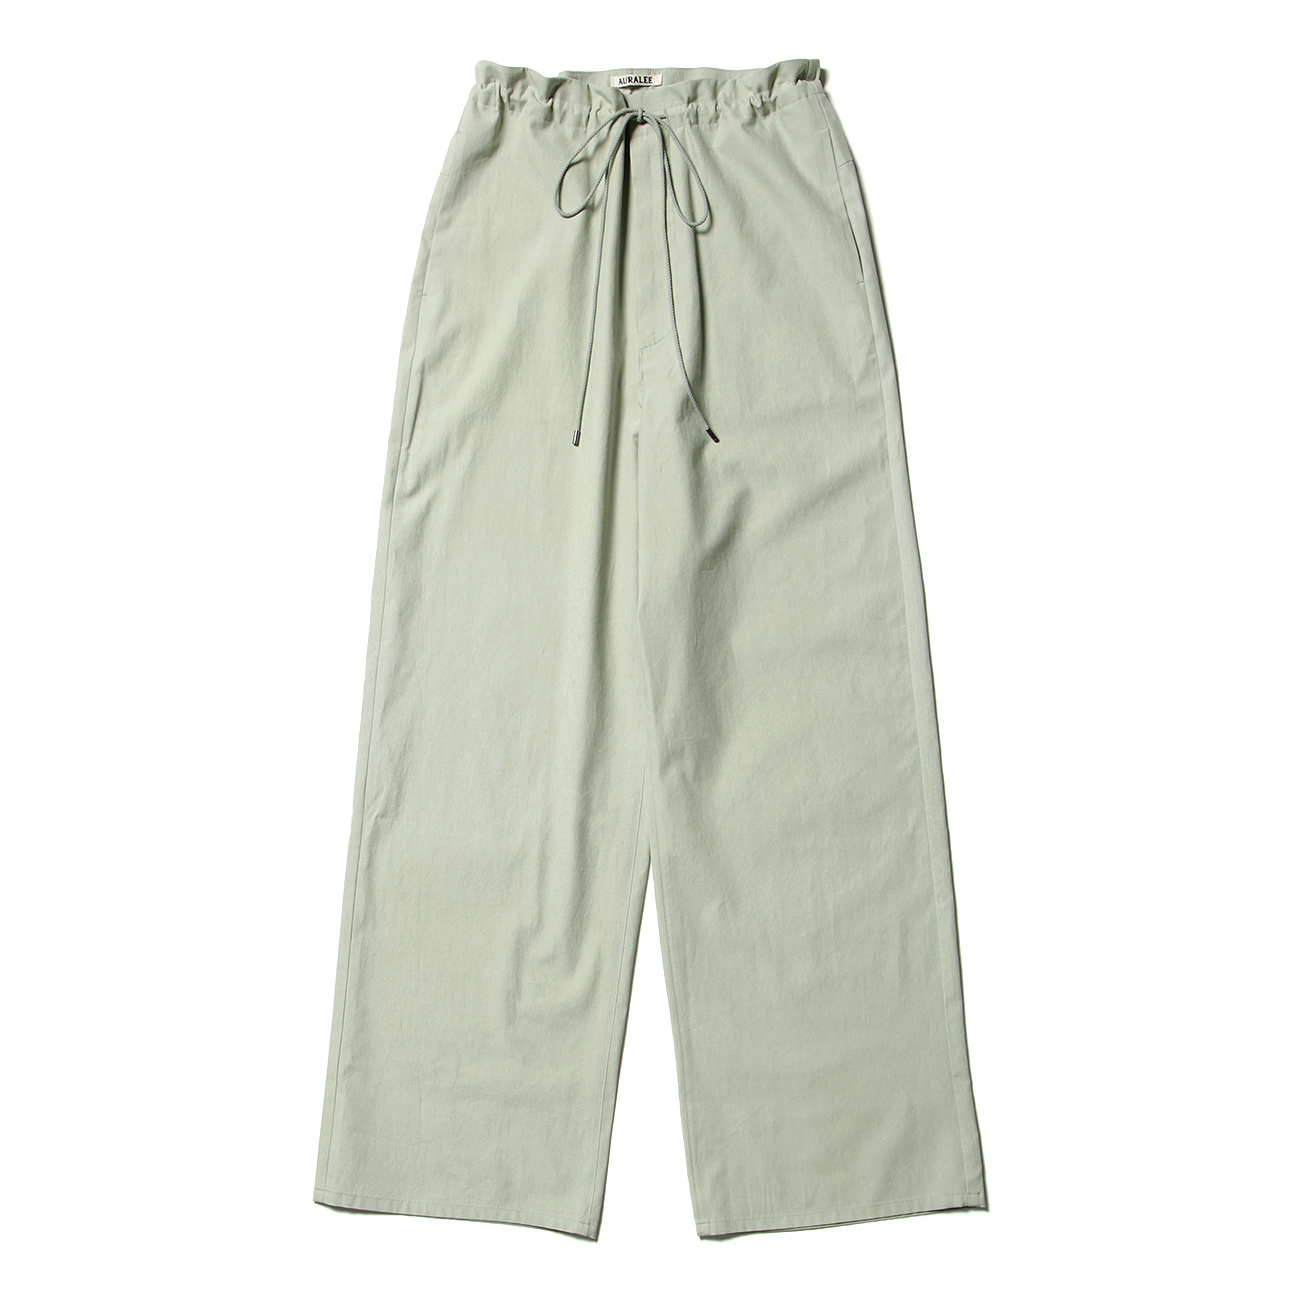 AURALEE / オーラリー |WASHED FINX TWILL EASY WIDE PANTS (レディース) - Light Green |  通販 - 正規取扱店 | COLLECT STORE / コレクトストア